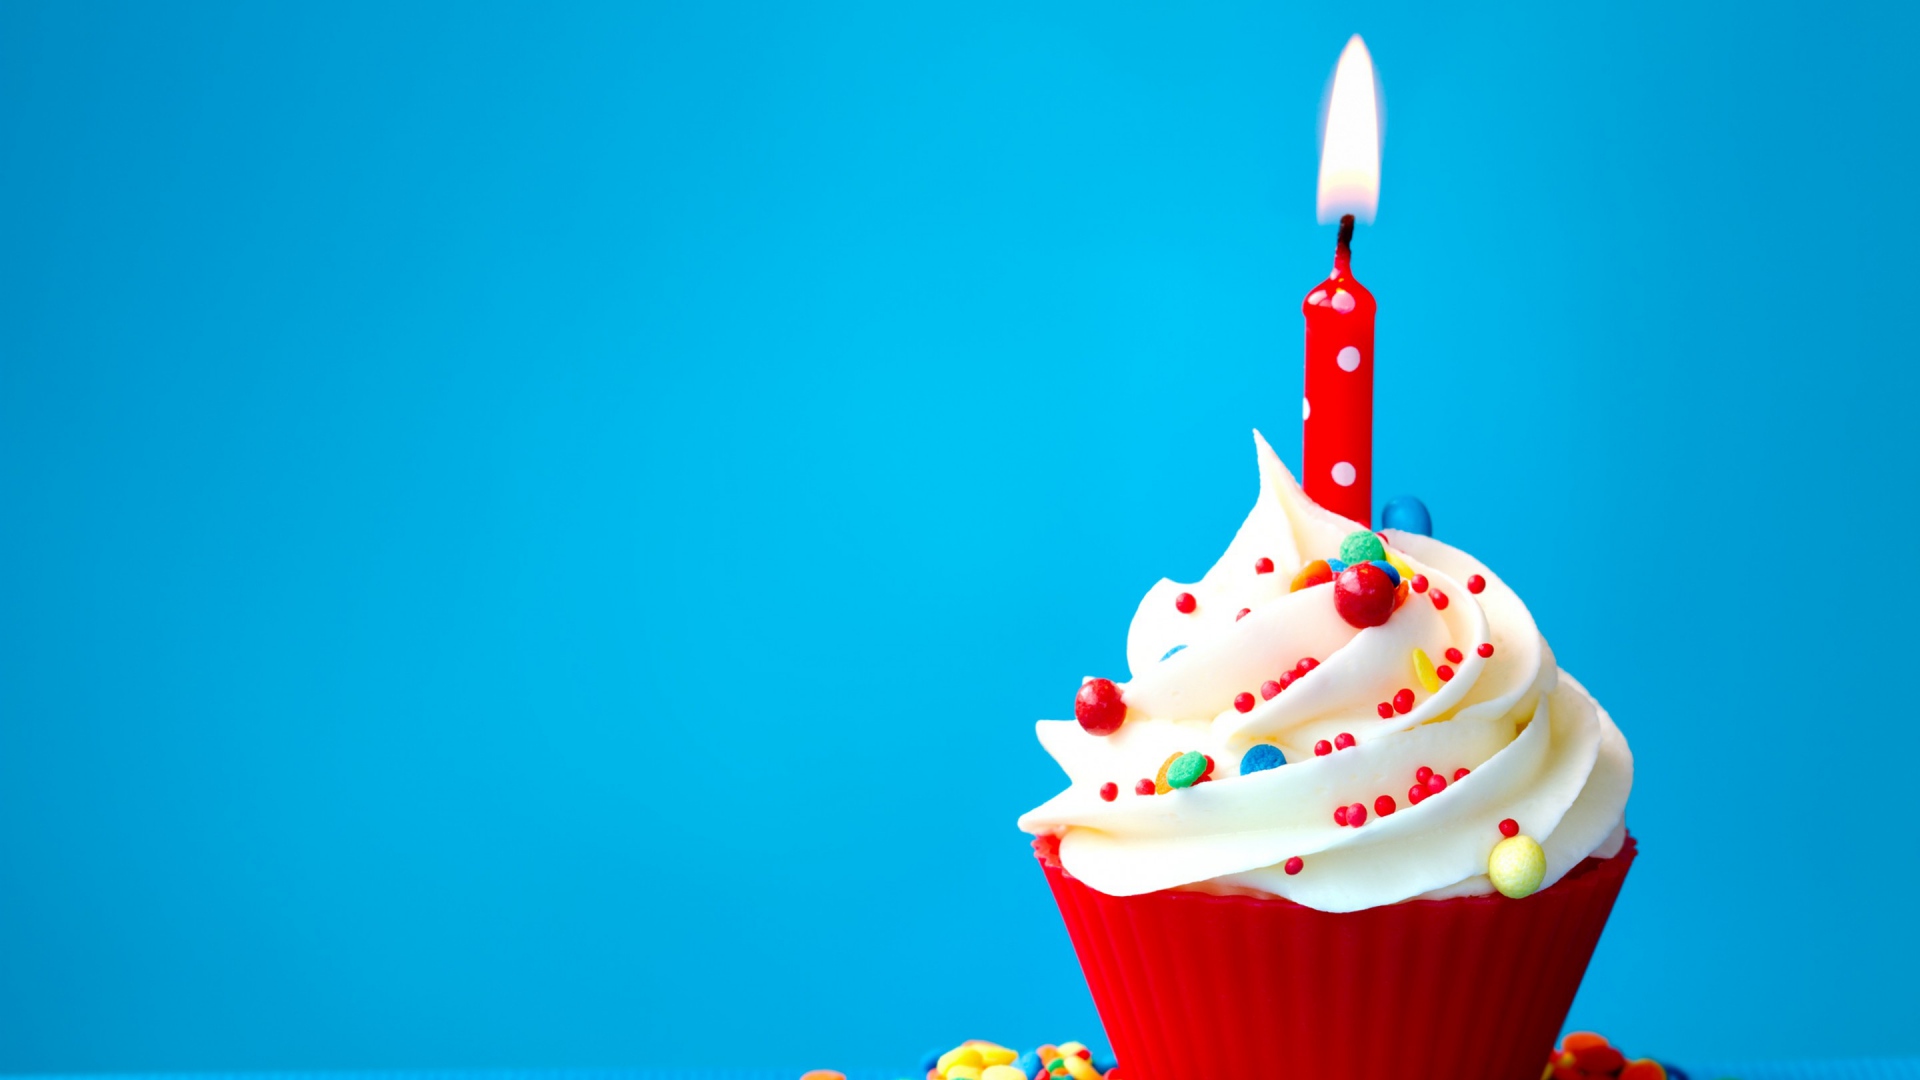 Wallpaper Happy Birthday Cake Candle - 1080p Birthday Wishes Images Hd - 1920x1080  Wallpaper 